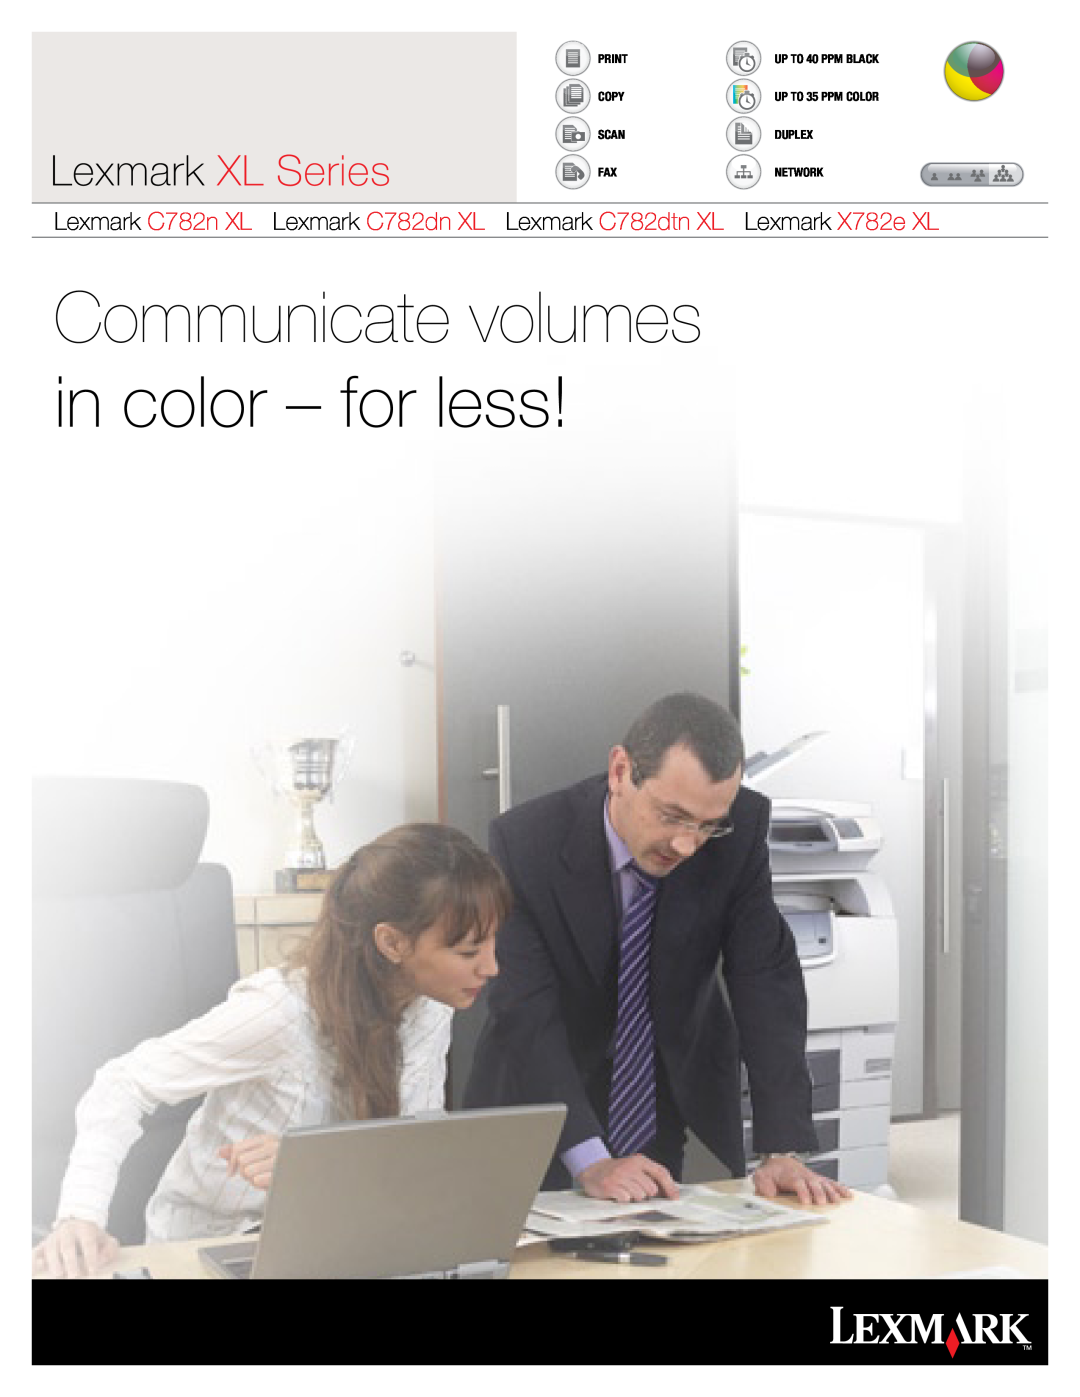 Lexmark C782dtn XL setup guide Lexmark XL Series, Communicate volumes in color - for less, Print Copy Scan Fax, Network 